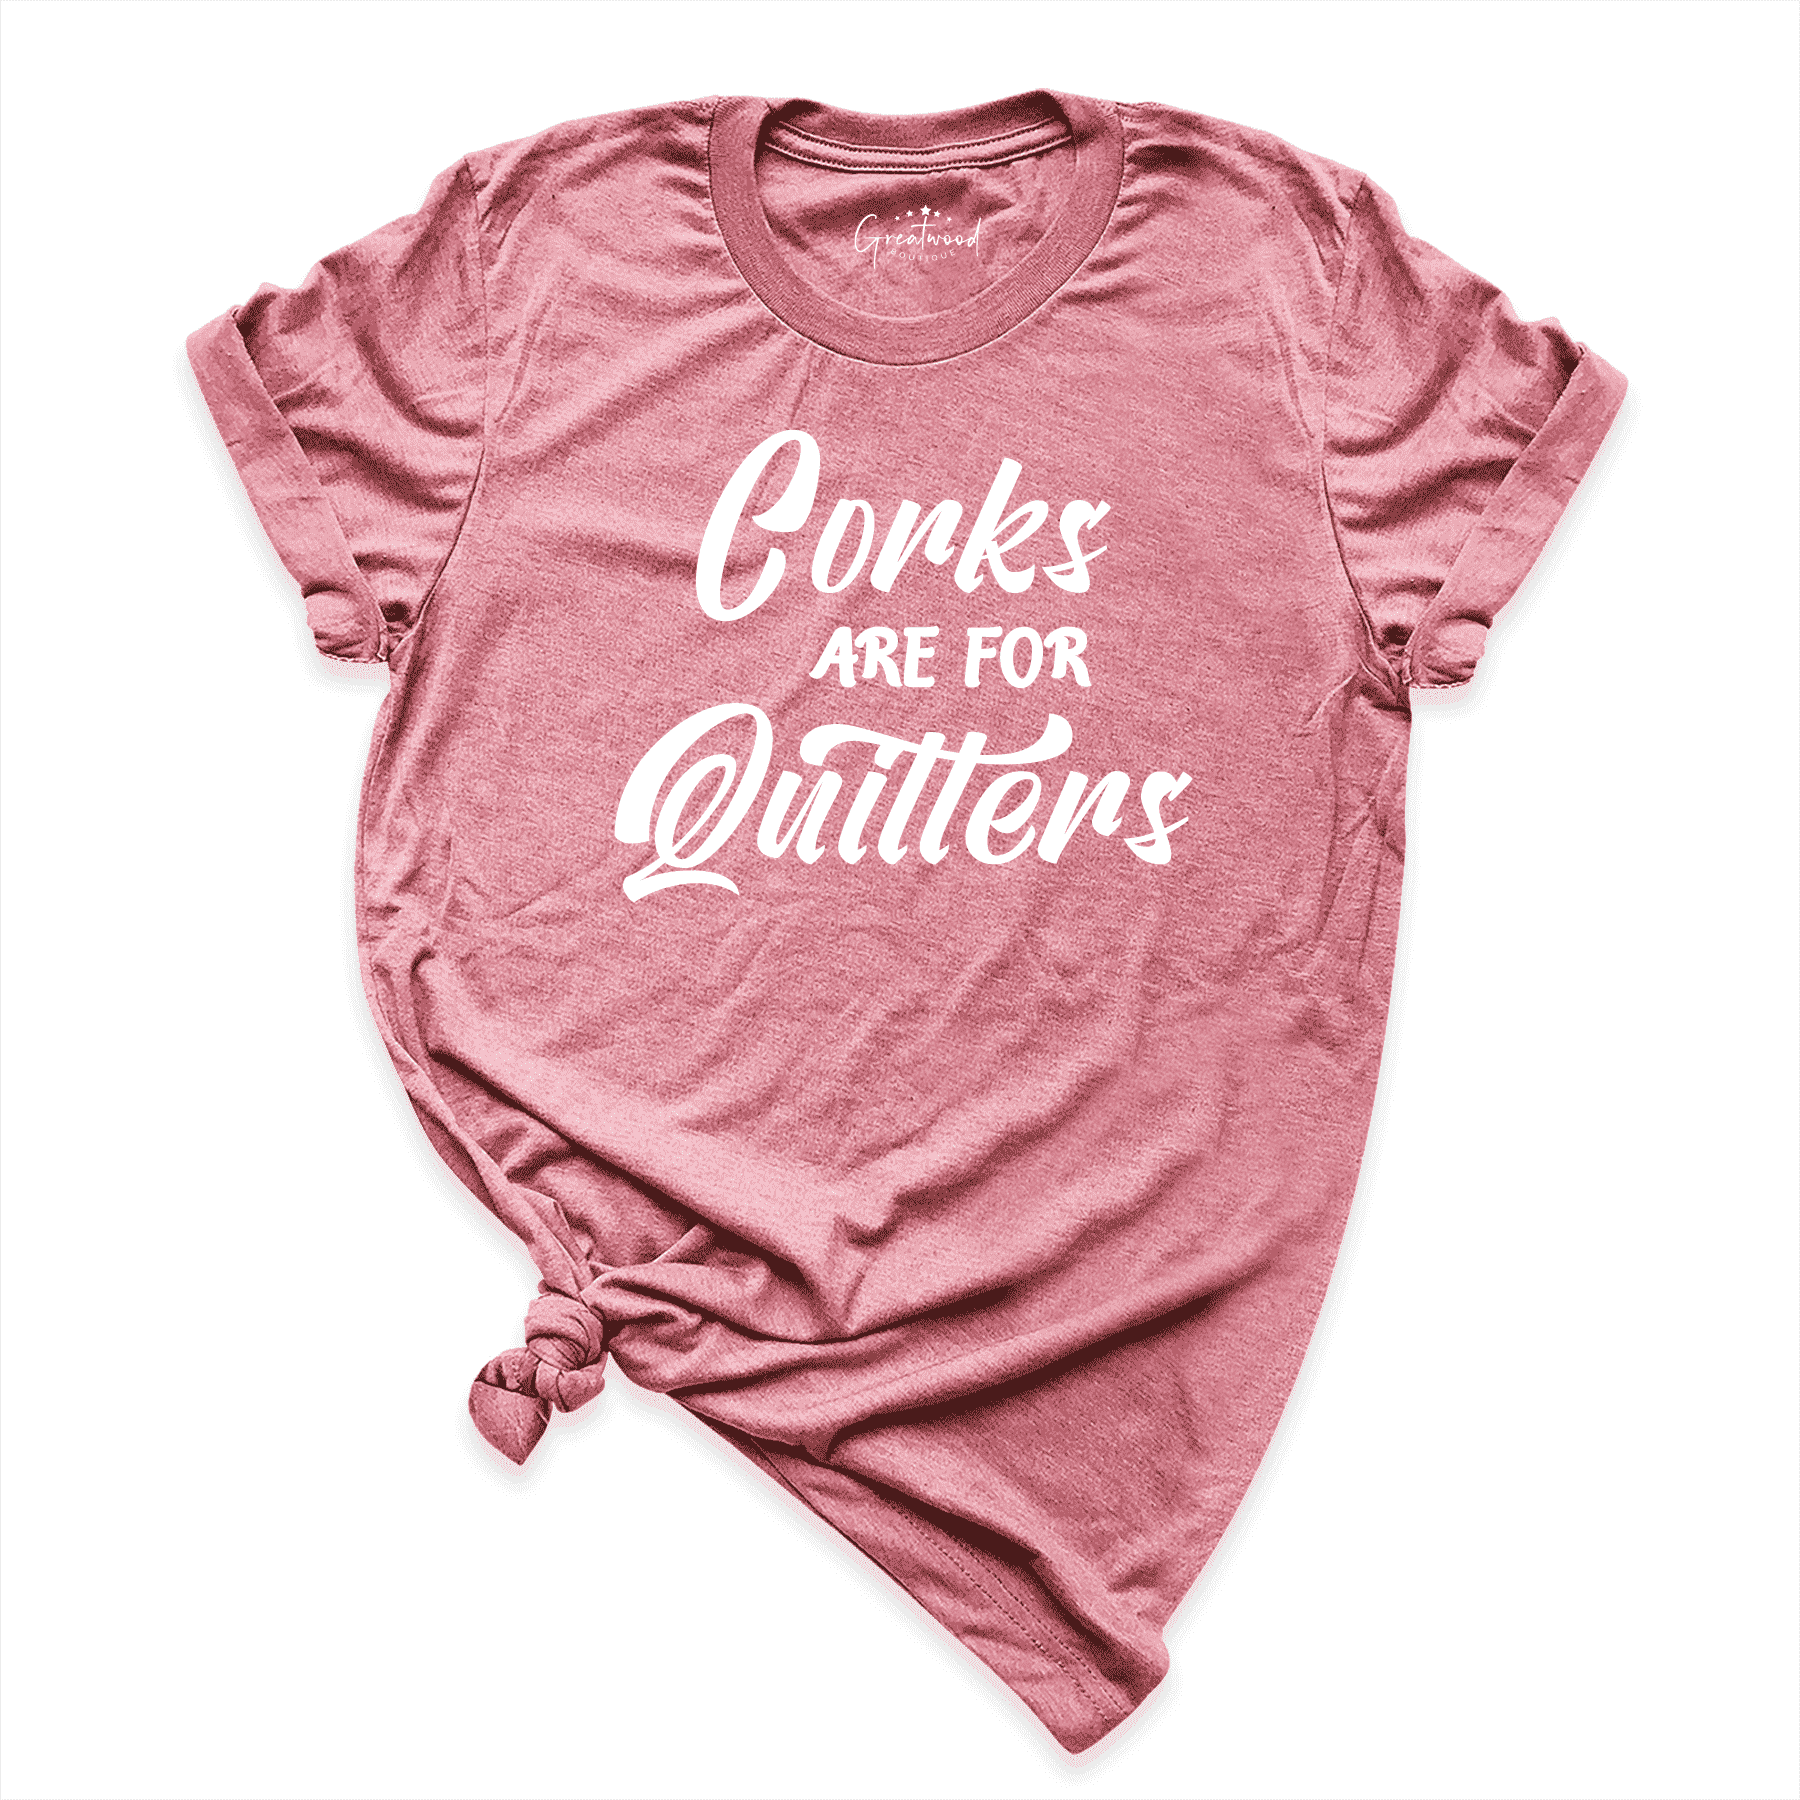 Corks Are for Quitters Shirt Mauve - Greatwood Boutique